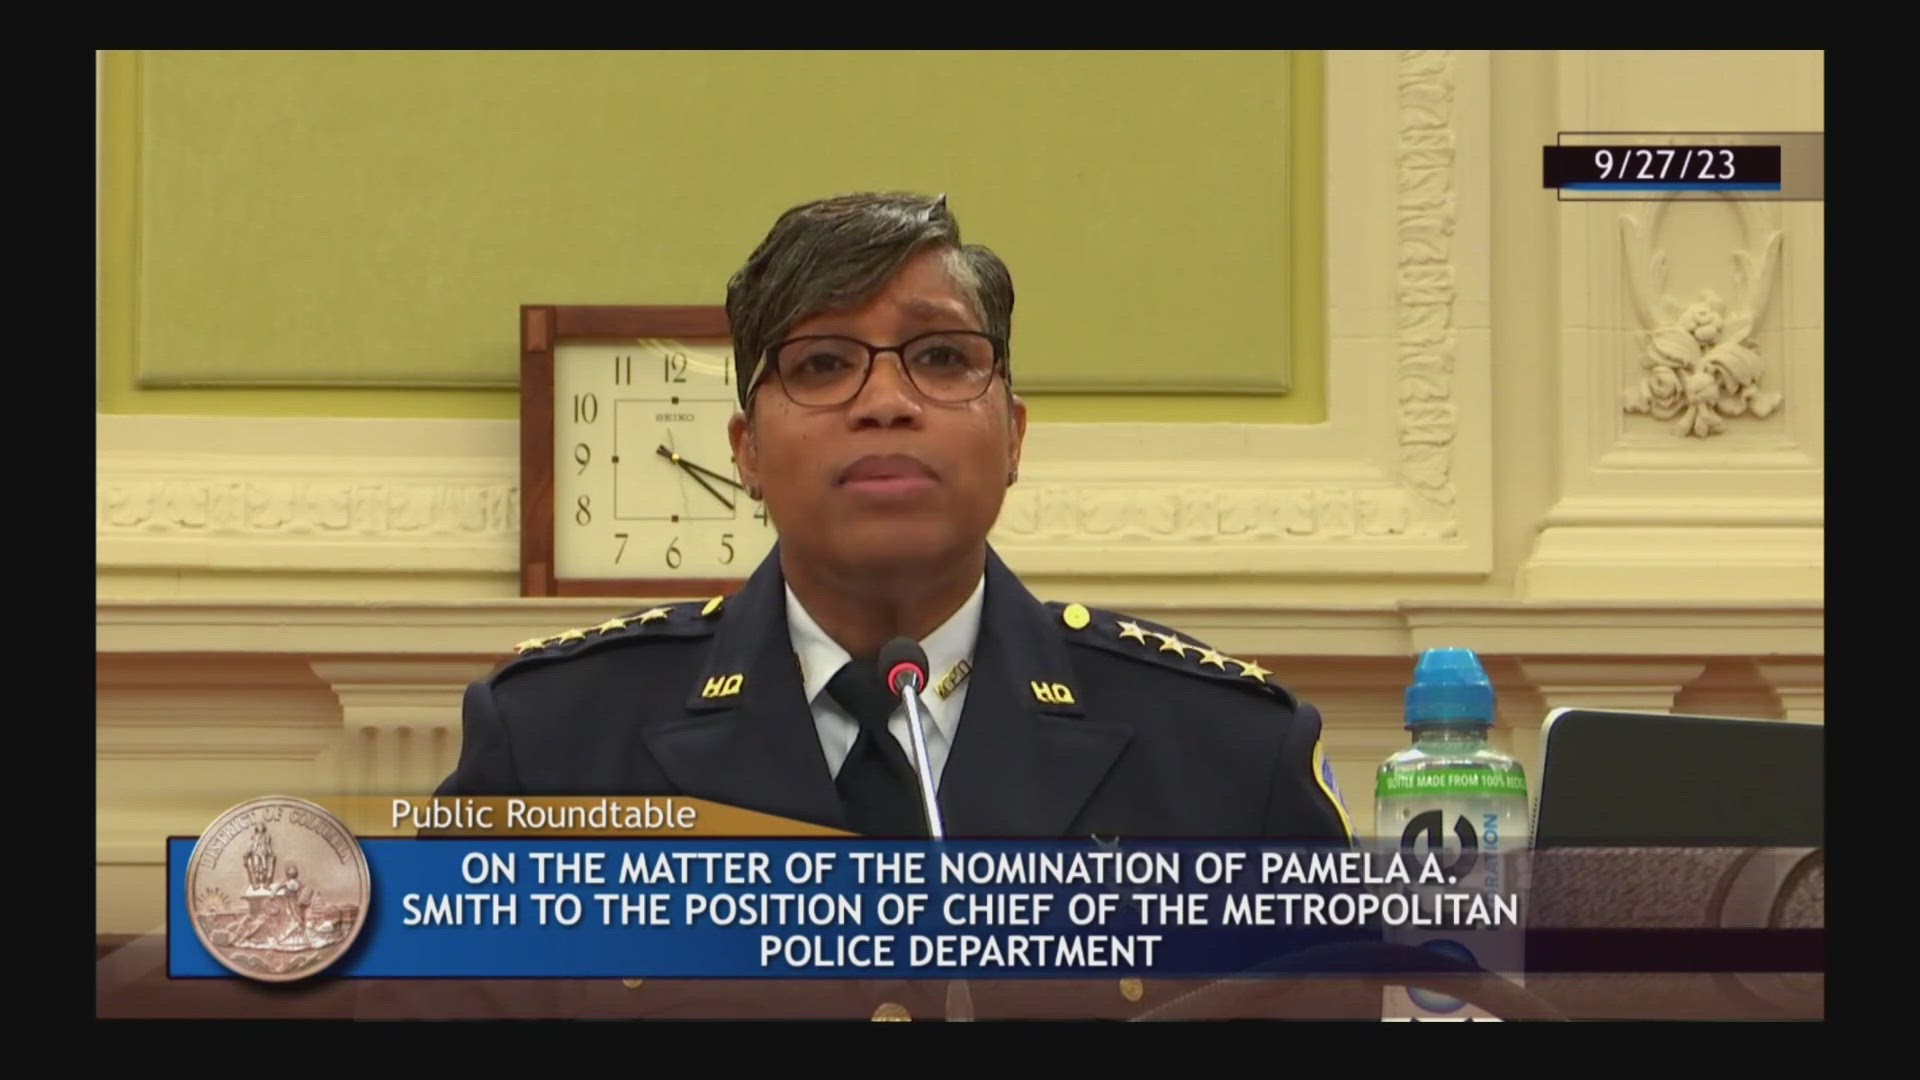 The Committee on the Judiciary & Public Safety held a public roundtable on the nomination of Pamela A. Smith to be the Chief of the Metropolitan Police Department.